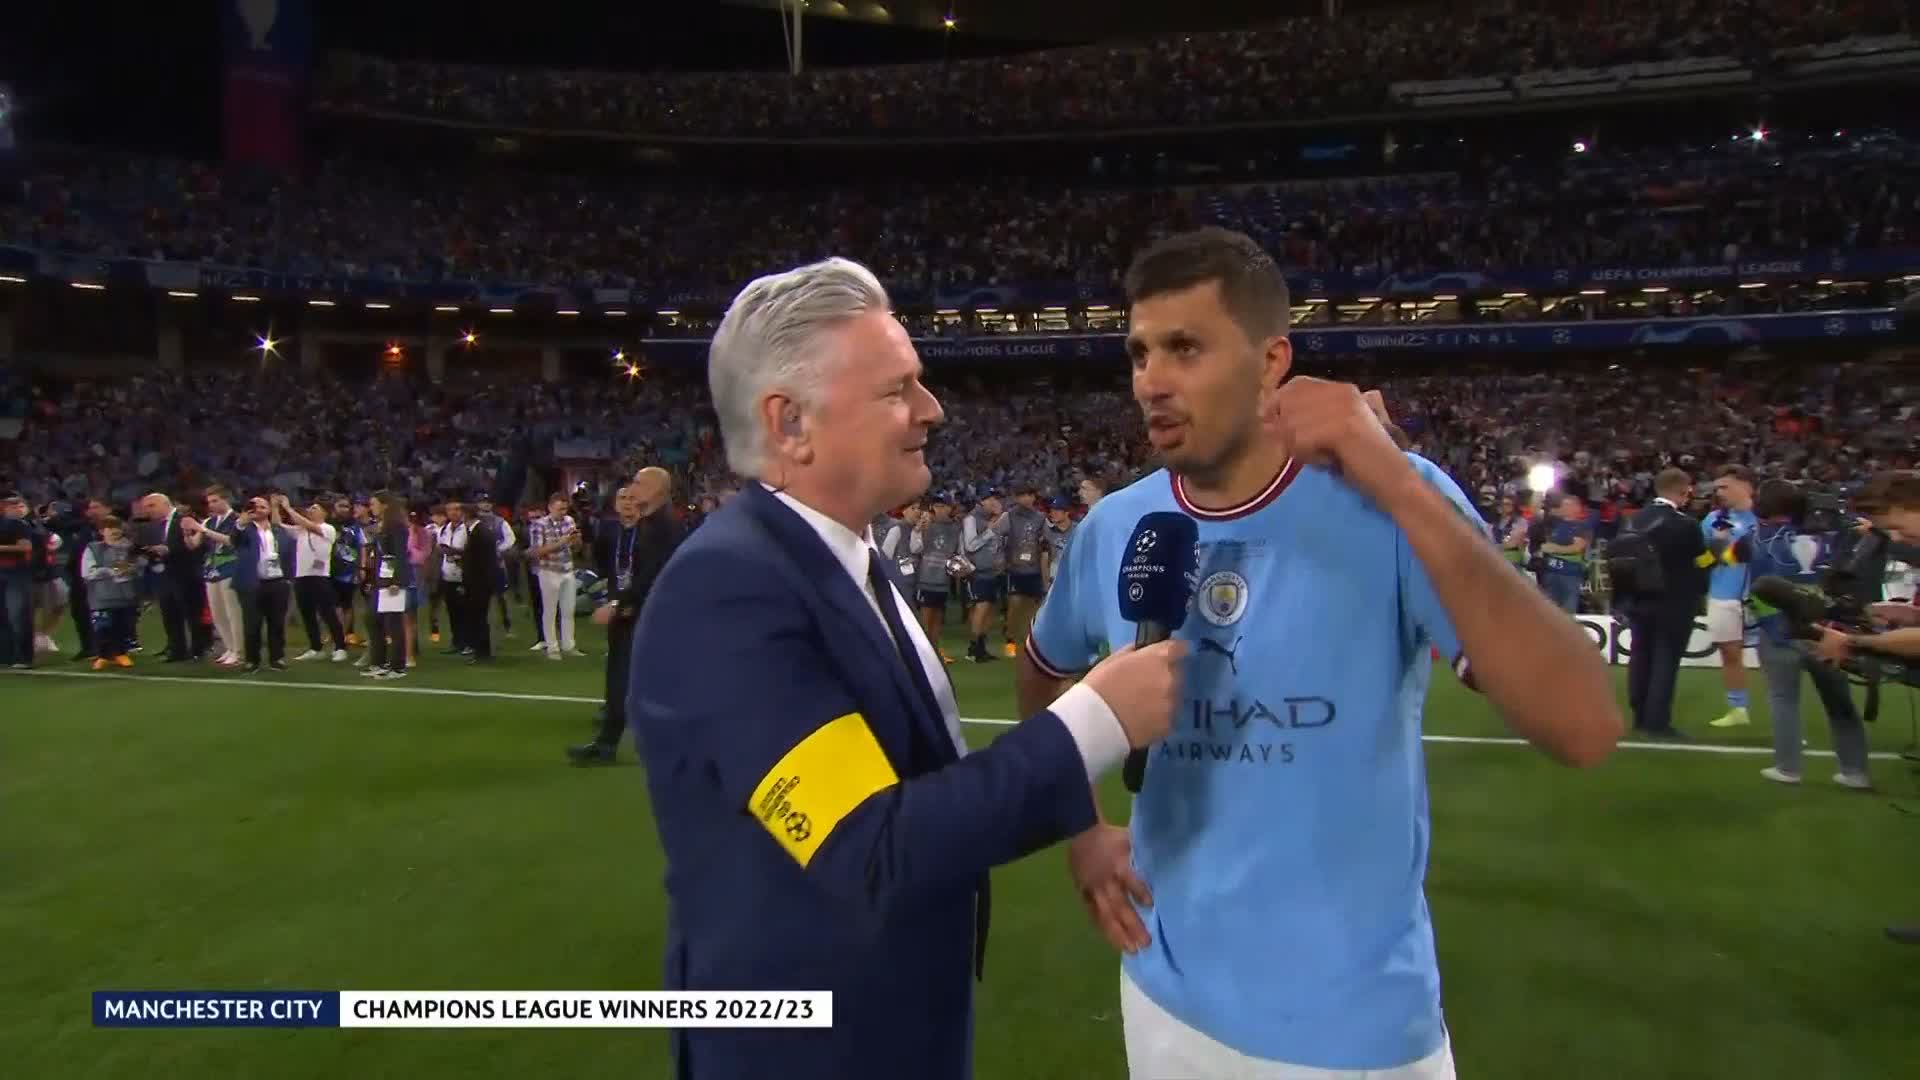 Video: Manchester City’s Rodri swears on live TV during post-match interview CaughtOffside